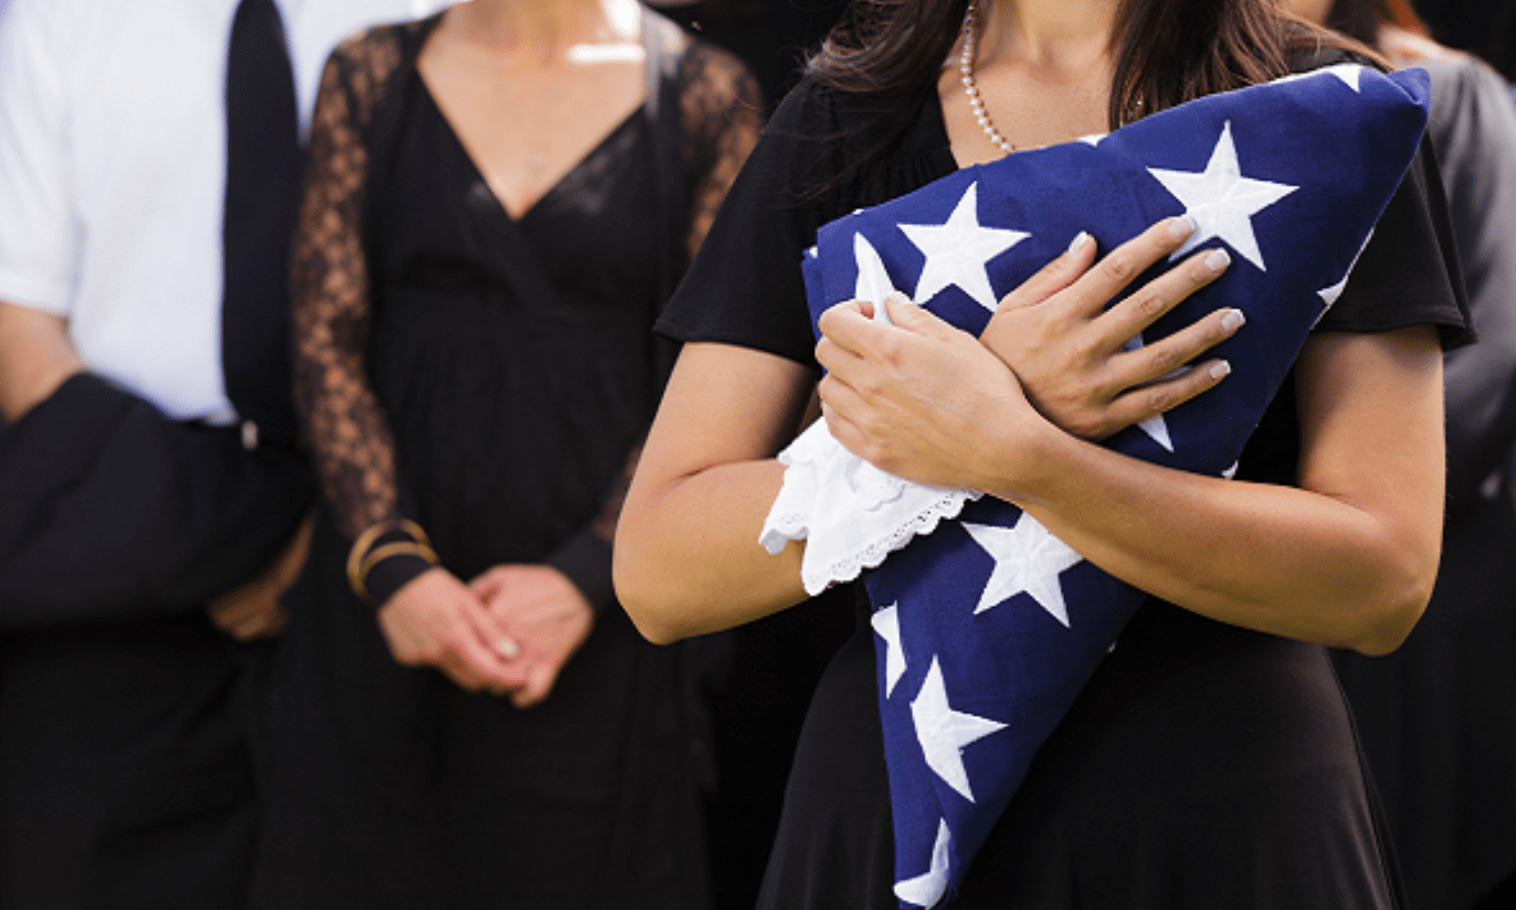 Military widows may finally receive survivor benefits after nearly two decades